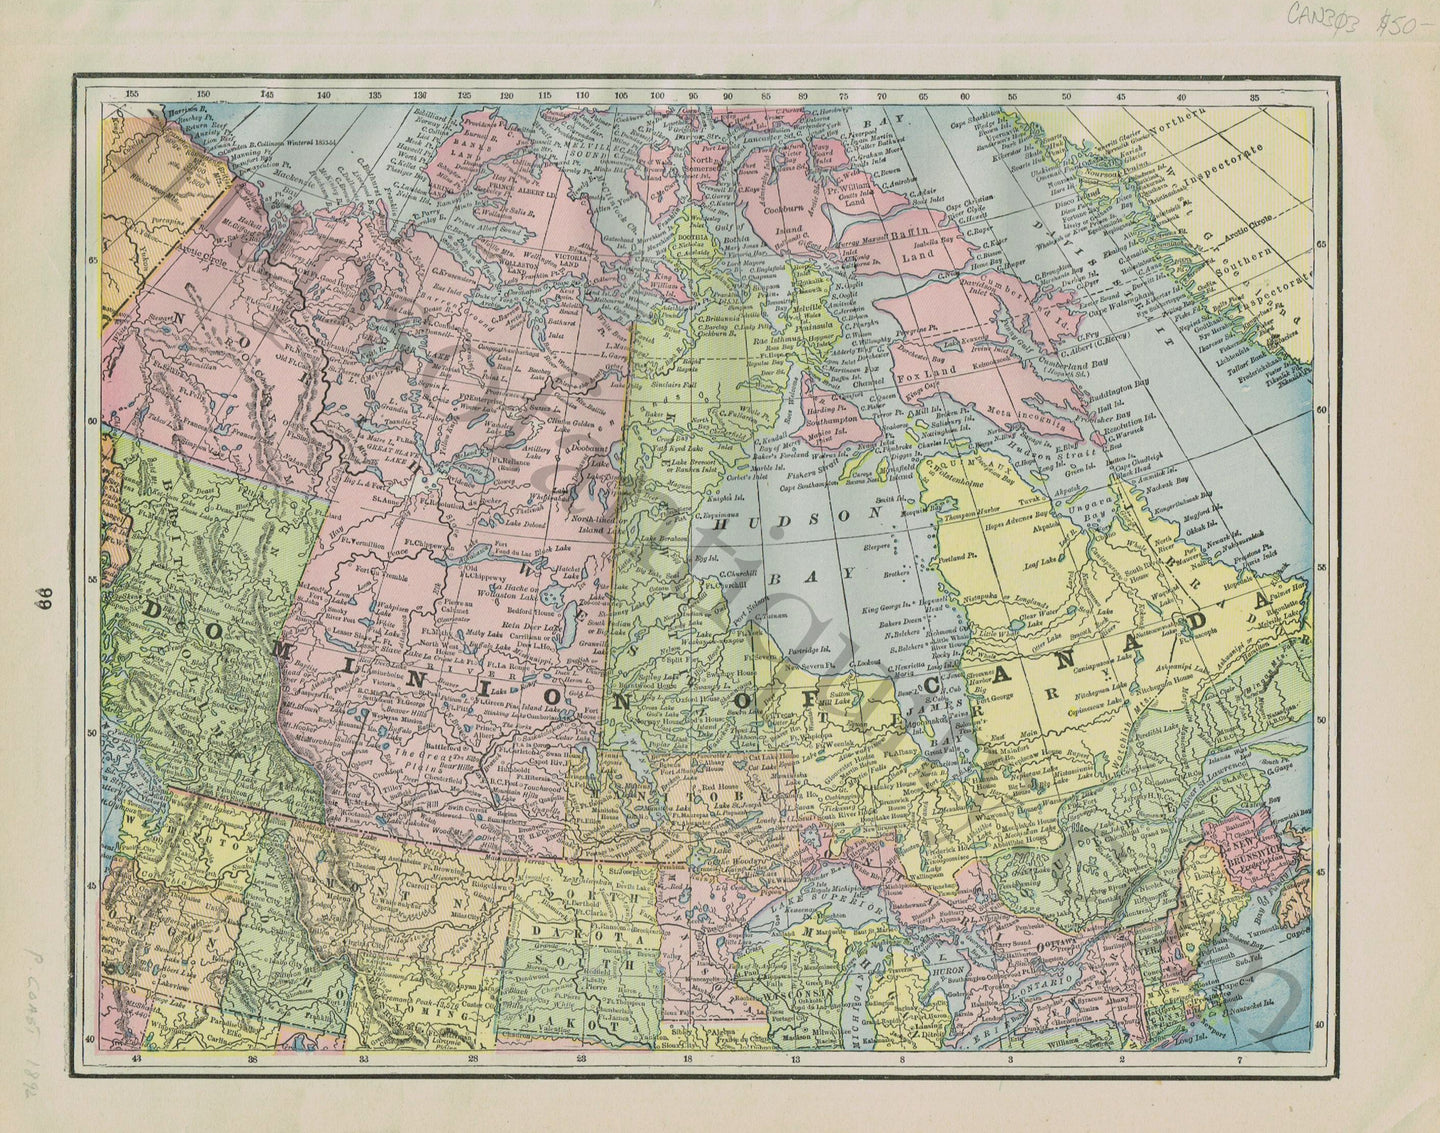 Antique-Map-Dominion-of-Canada-New-Brunswick-and-&-Nova-Scotia-Home-Library-and-Supply-Association-Pacific-Coast-1892-1890s-1800s-Late-19th-Century-Maps-of-Antiquity